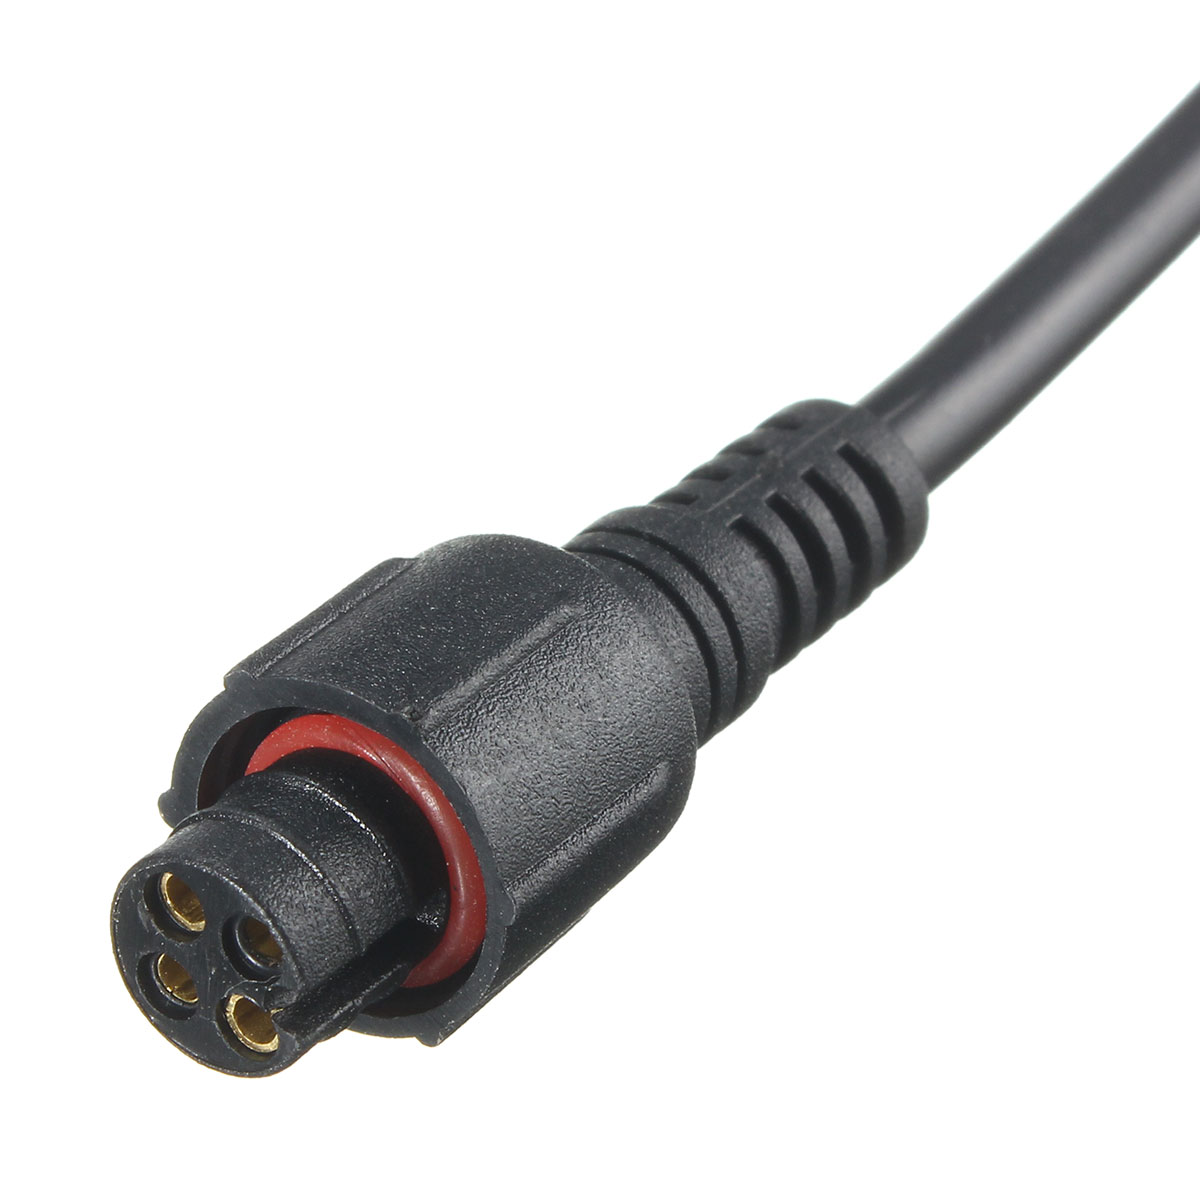 4-Pin-2A-Waterproof-Male-Female-Extension-Cable-Wire-Connector-for-RGB-LED-Strip-Light-1456460-3